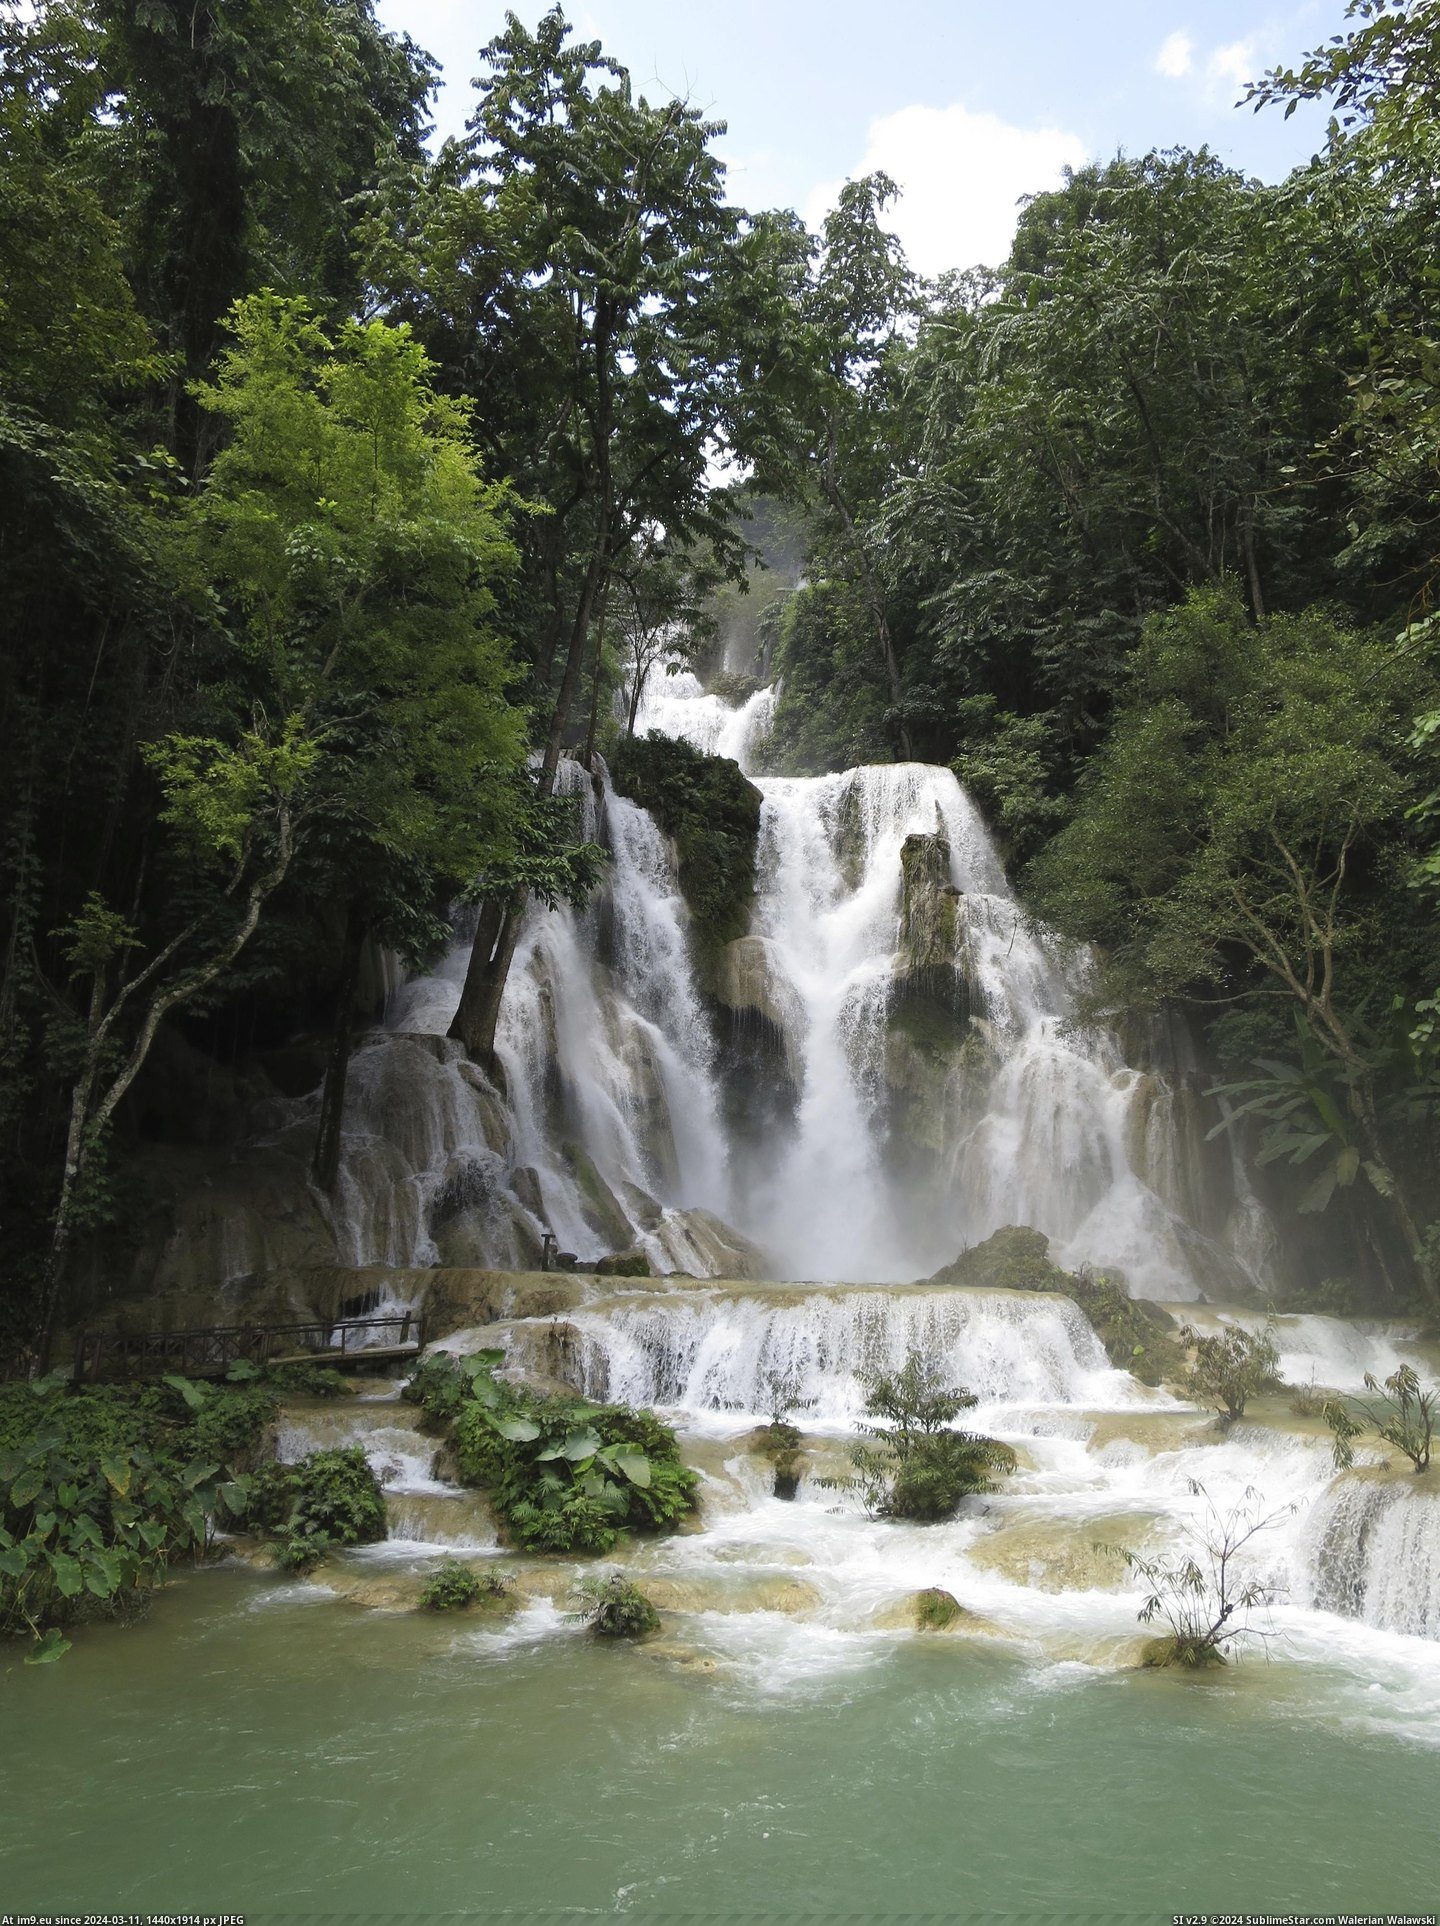 #Great #Falls #Holes #Laos #Travelling #Kuang #Asia #Swimming #Visit [Earthporn] Travelling in SE Asia? You have to visit Kuang Si Falls in Laos. There are some great swimming holes further down to Pic. (Image of album My r/EARTHPORN favs))